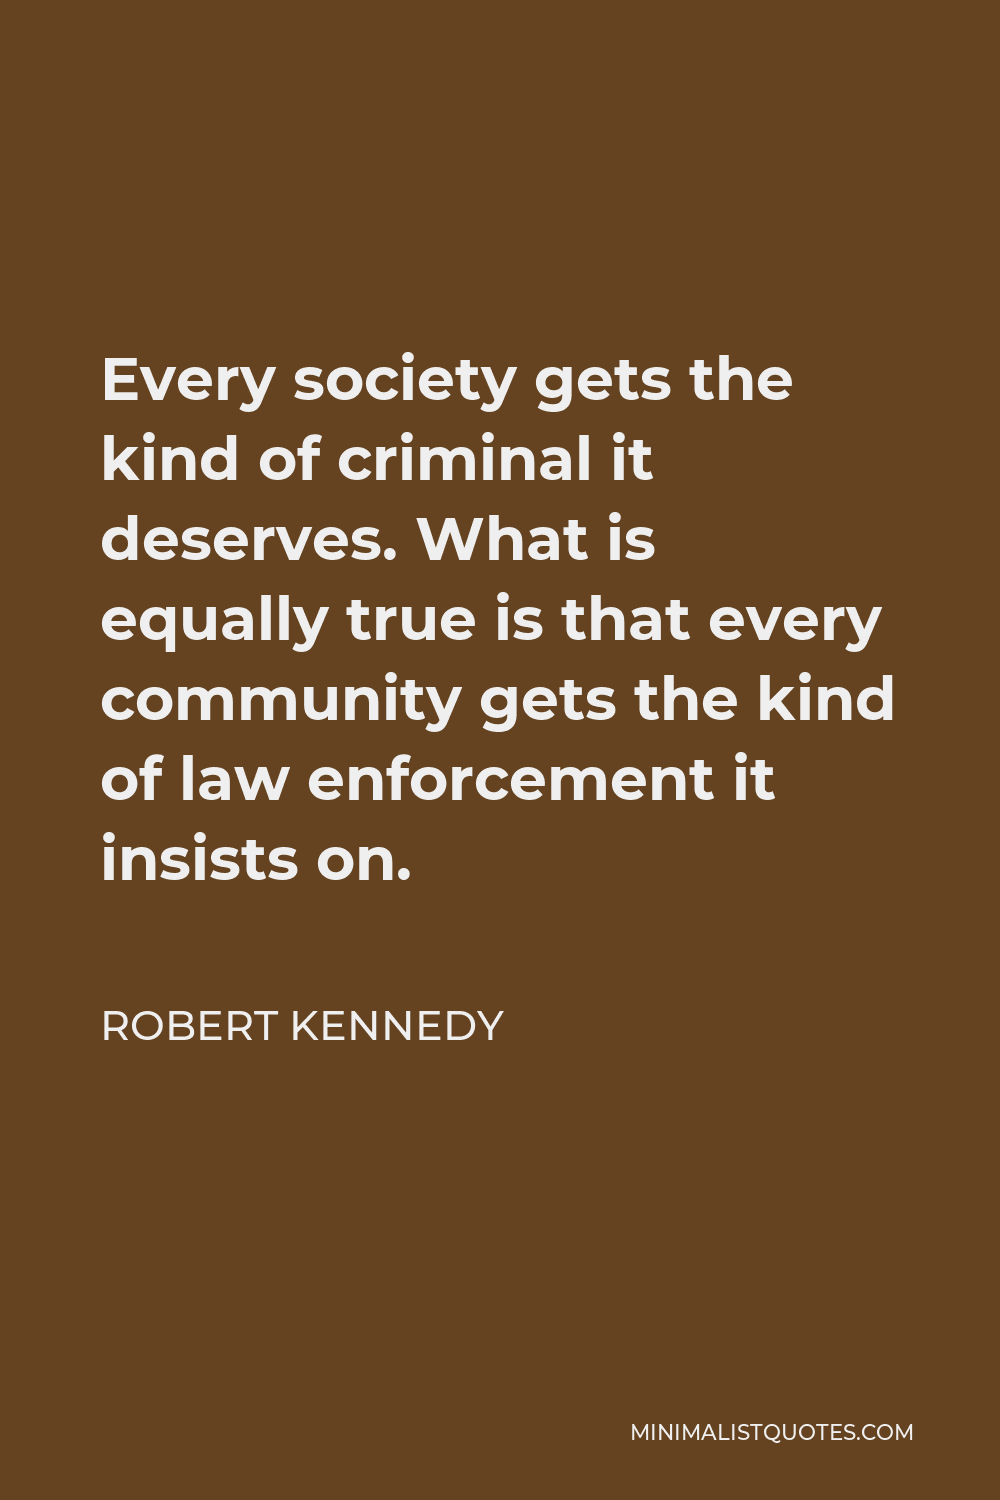 Robert Kennedy Quote - Every society gets the kind of criminal it deserves.